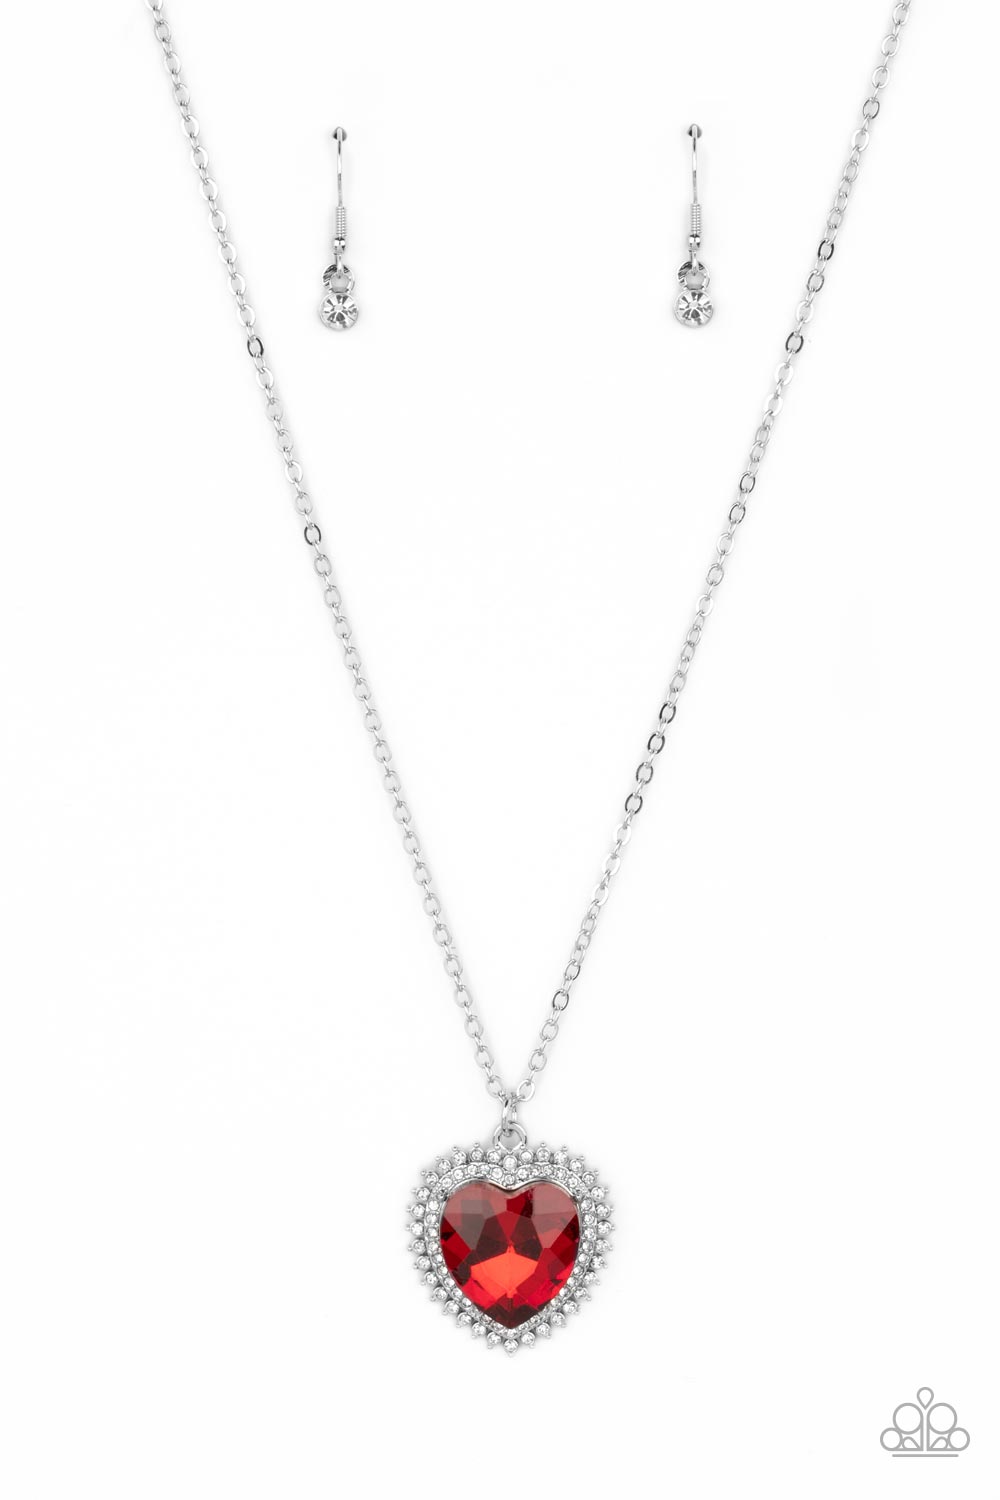 Paparazzi Sweethearts Stroll Red Short Necklace - P2RE-RDXX-253XX